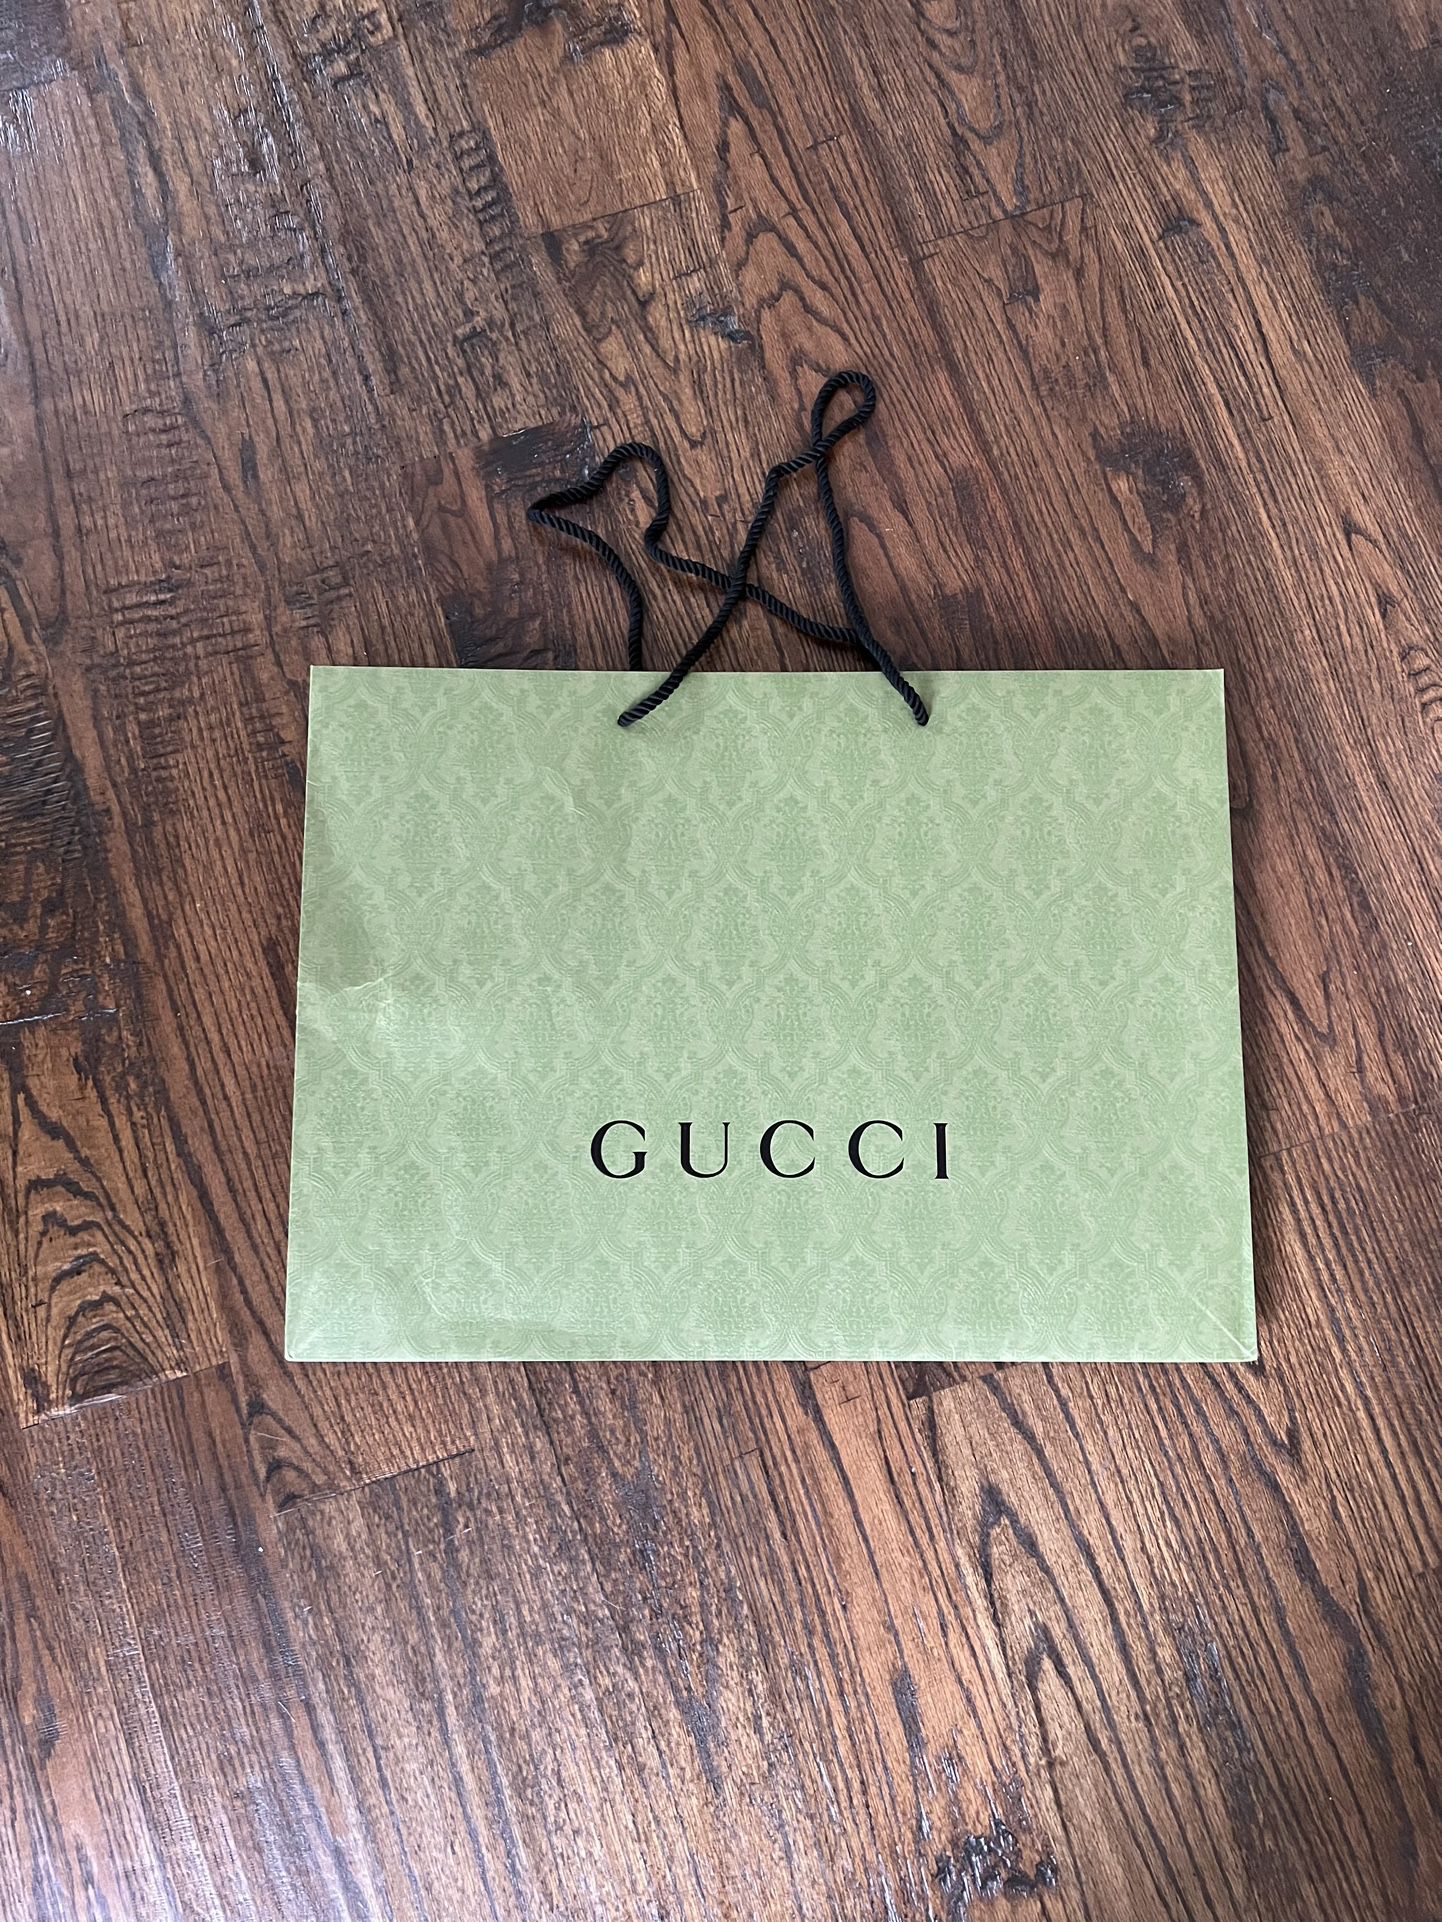 Gucci X Large Limitied Edition Paper Bag! 